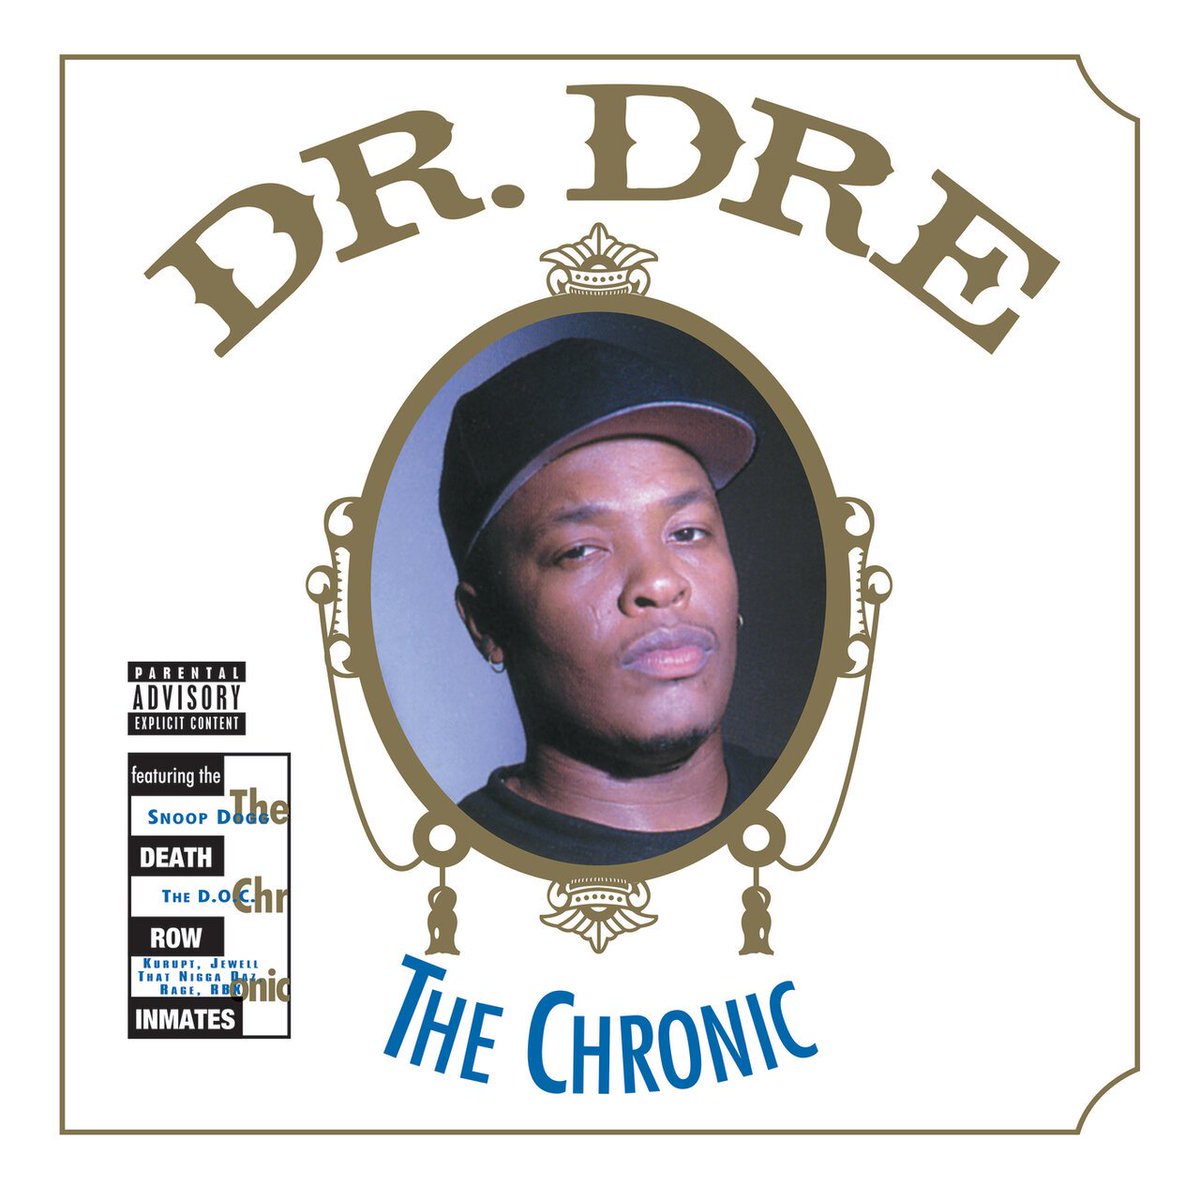 Dre put his foot in this Production!!!
🏆🏆🏆🏆🏆
Listen to Lil' Ghetto Boy by Dr. Dre, Daz, Snoop Dogg tidal.com/track/27416824…